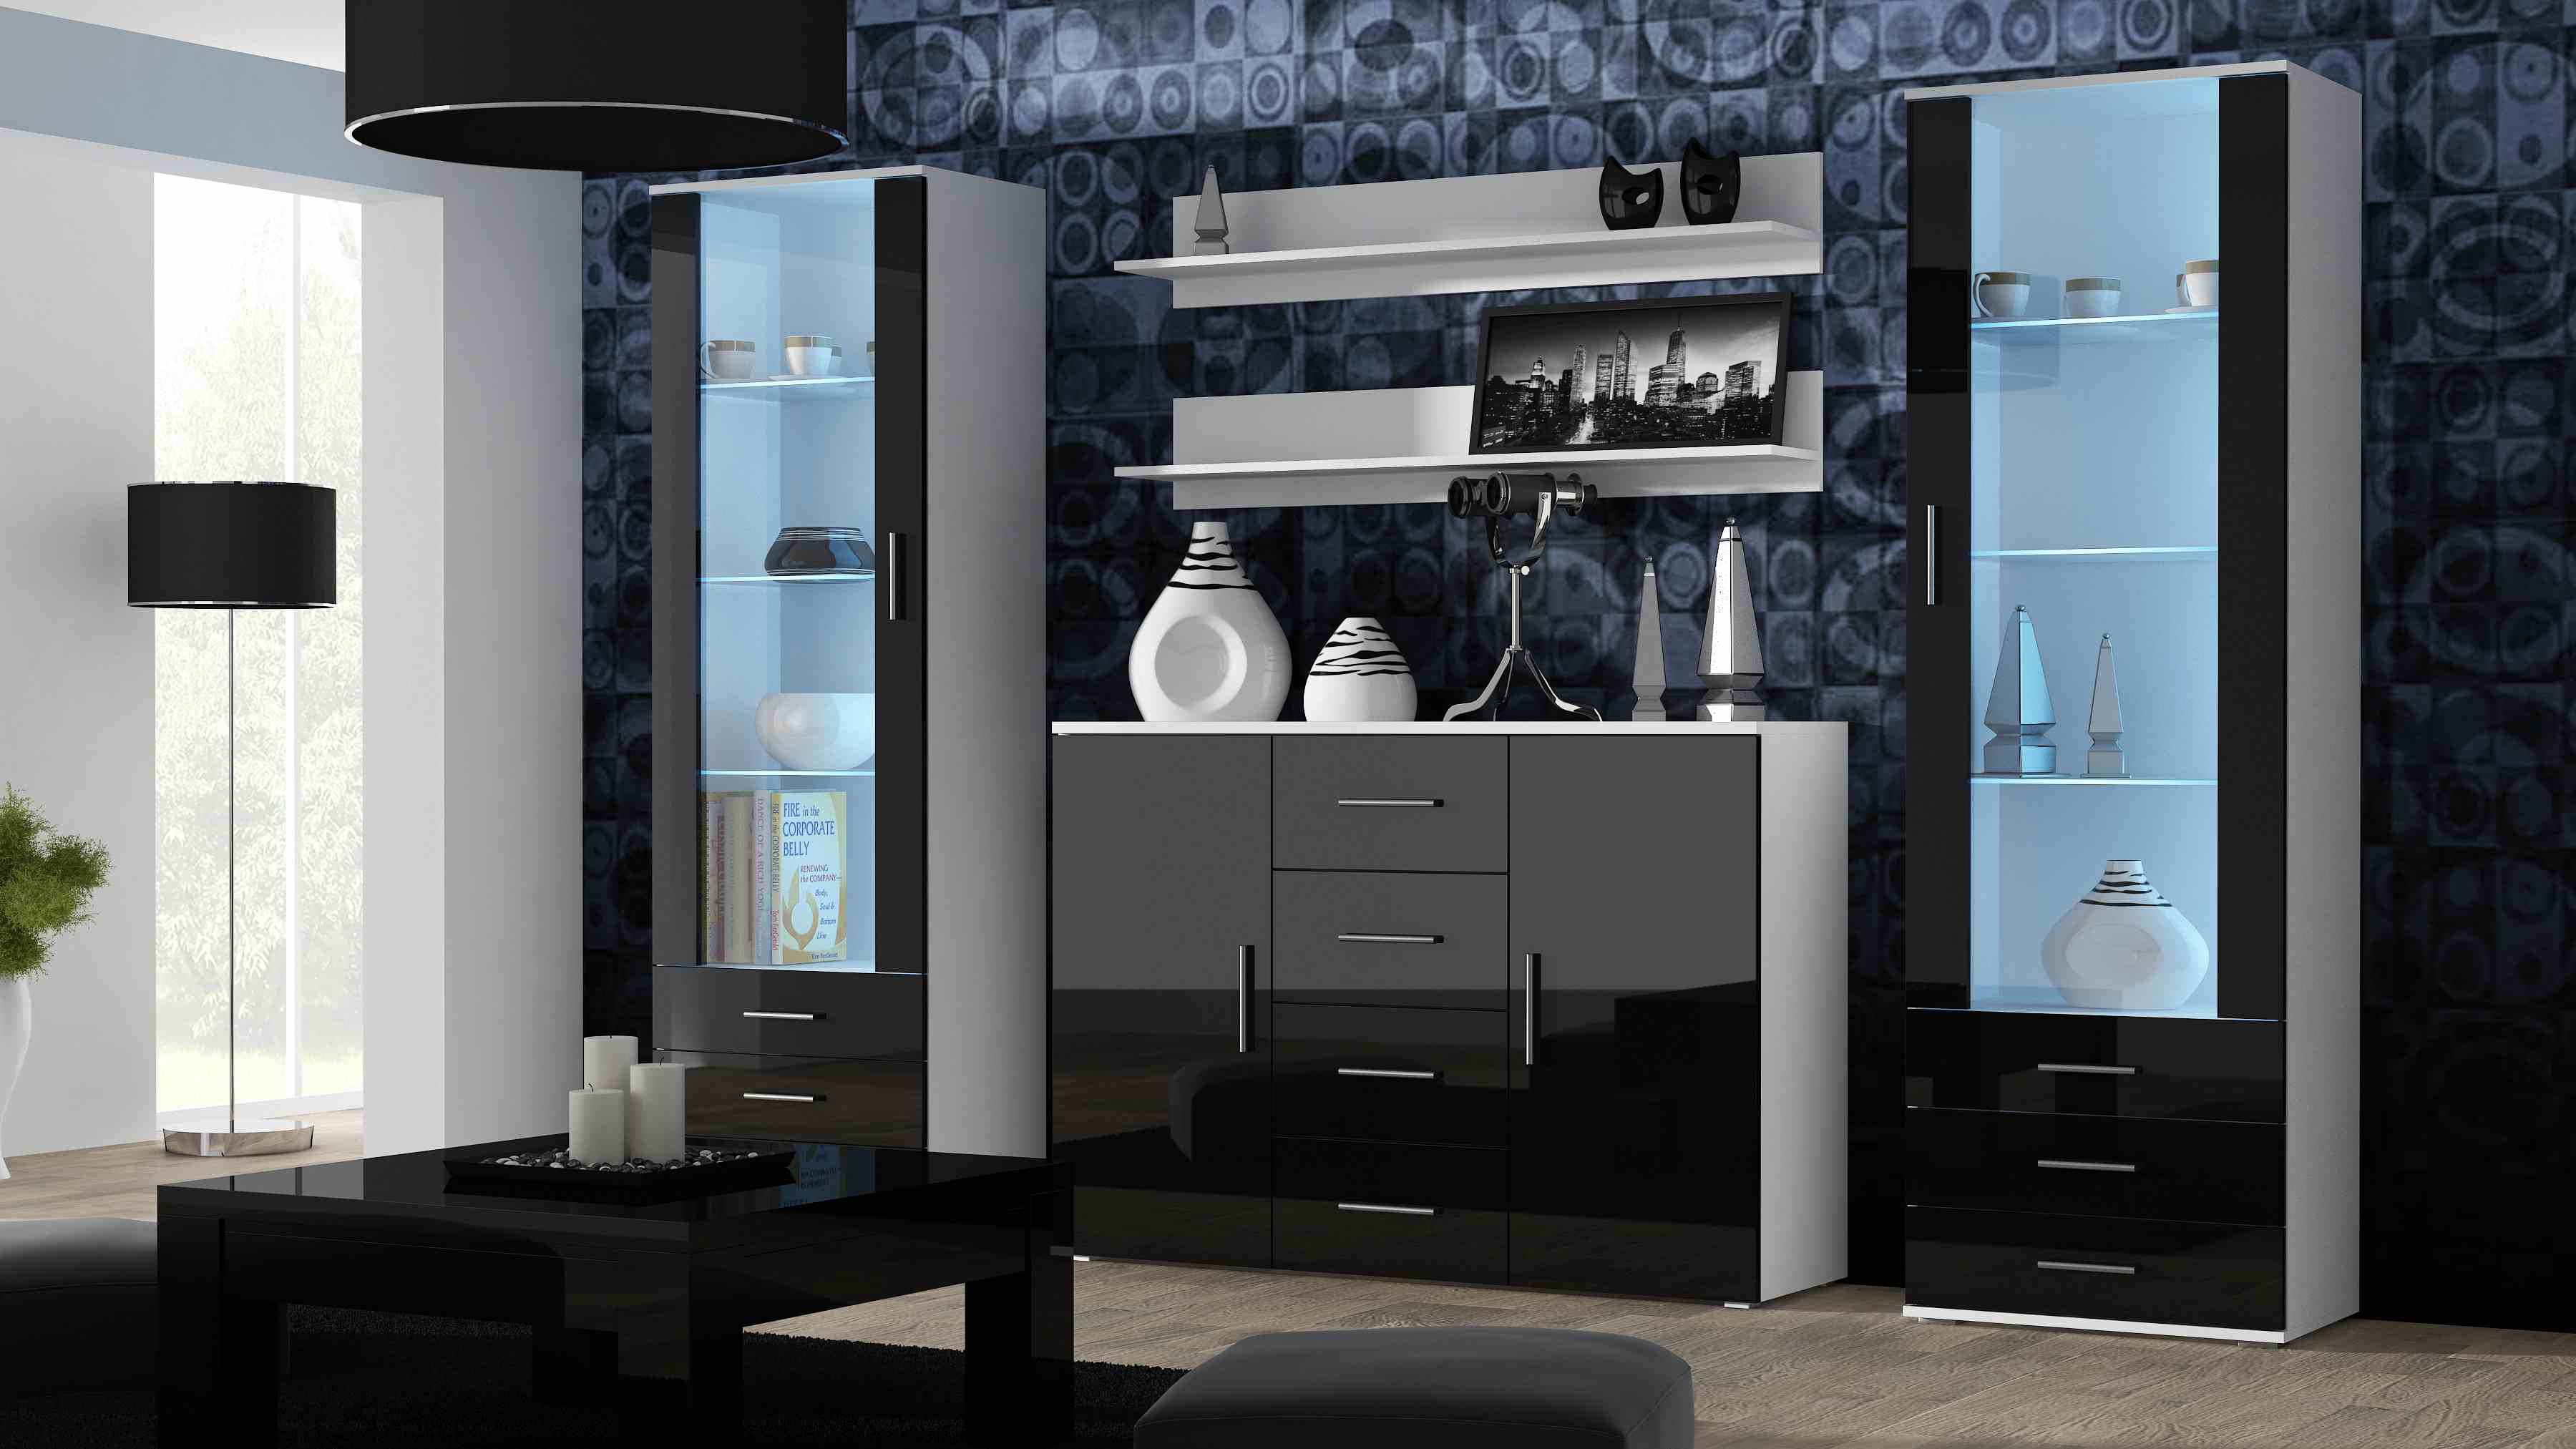 Photo design of a TV stand for a room with dark furniture